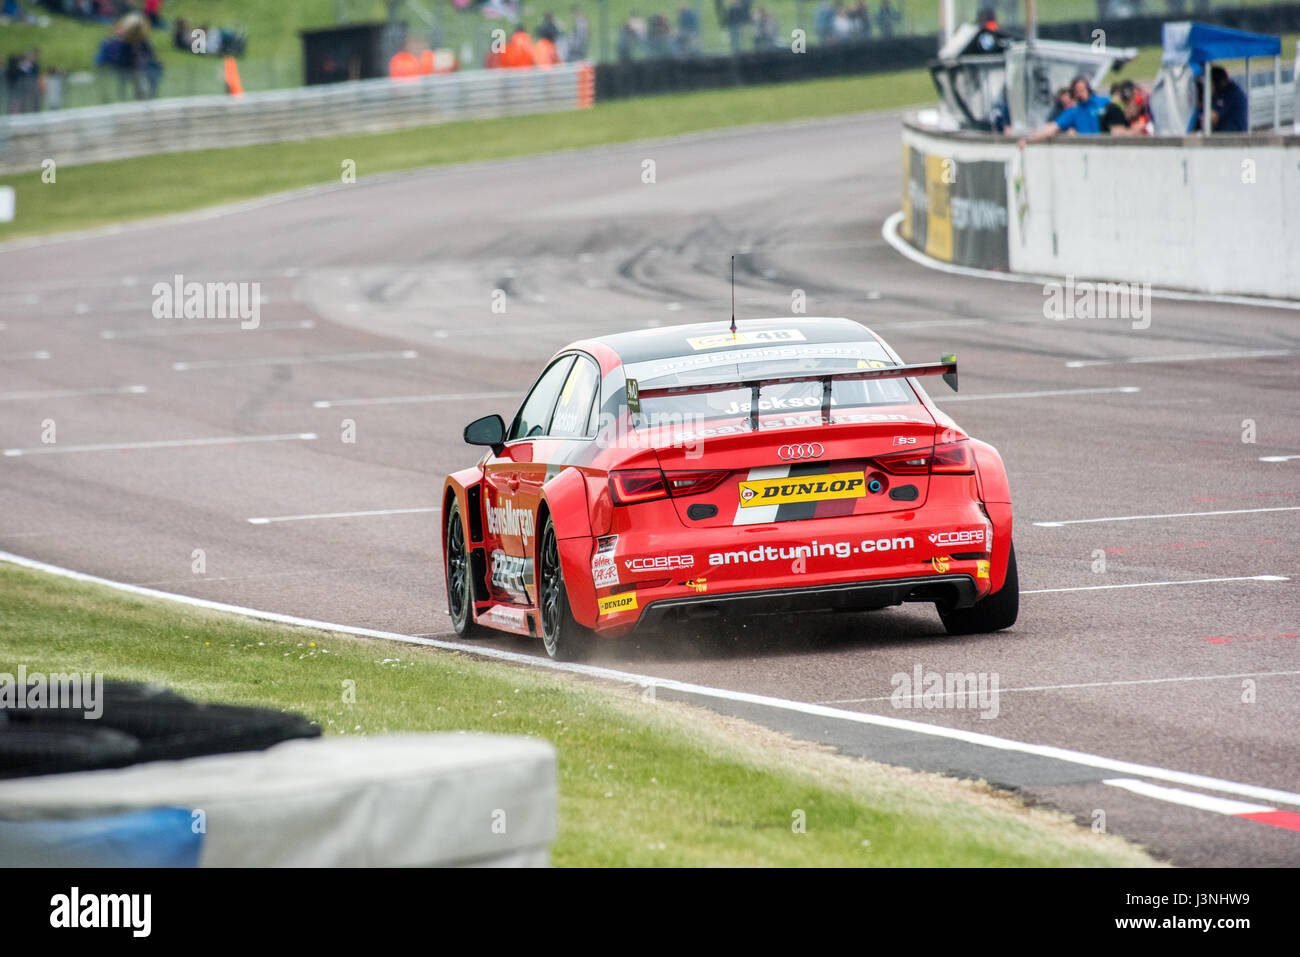 Hampshire, UK. 6th May, 2017. Thruxton Race Circuit and Motorsport Centre, Andover, Hampshire, United Kingdom. 6 May 2016. Ollie Jackson of team AmDtuning.com with Cobra Exhausts in his Audi S3 Qualifying at Dunlop MSA British Touring Car Championship. All cars race today with the #BillyWhizz number plates and livery in support of Billy Monger who suffered life changing injuries at Donington Park a few weeks ago during an F4 (Formula 4) British Championship Race. © Will Bailey / Alamy Live News Stock Photo